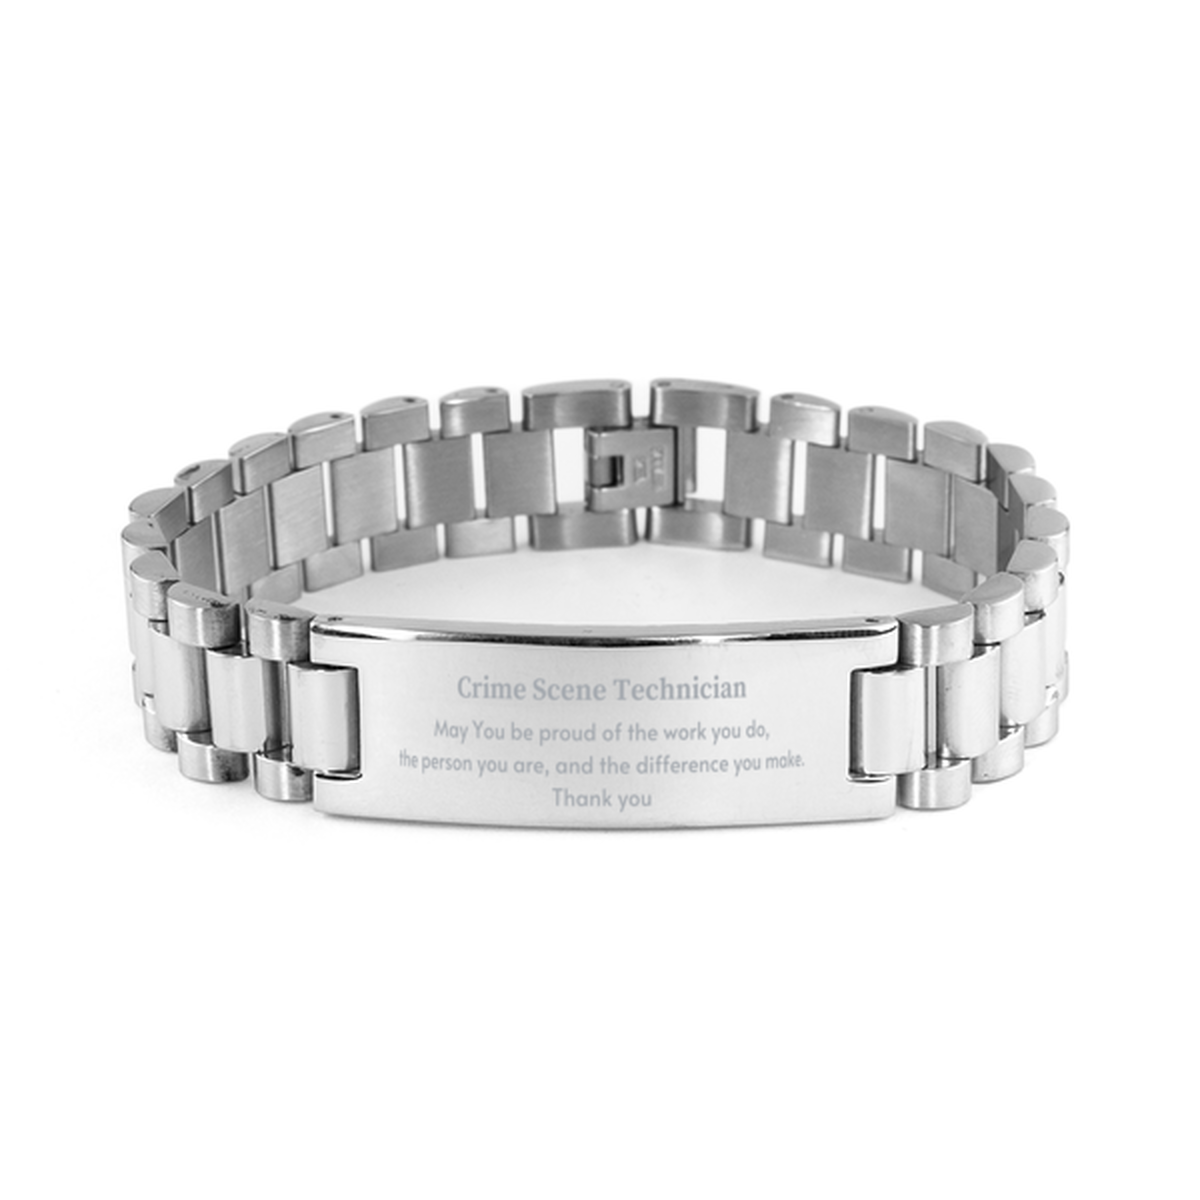 Heartwarming Ladder Stainless Steel Bracelet Retirement Coworkers Gifts for Crime Scene Technician, Crime Scene Technician May You be proud of the work you do, the person you are Gifts for Boss Men Women Friends